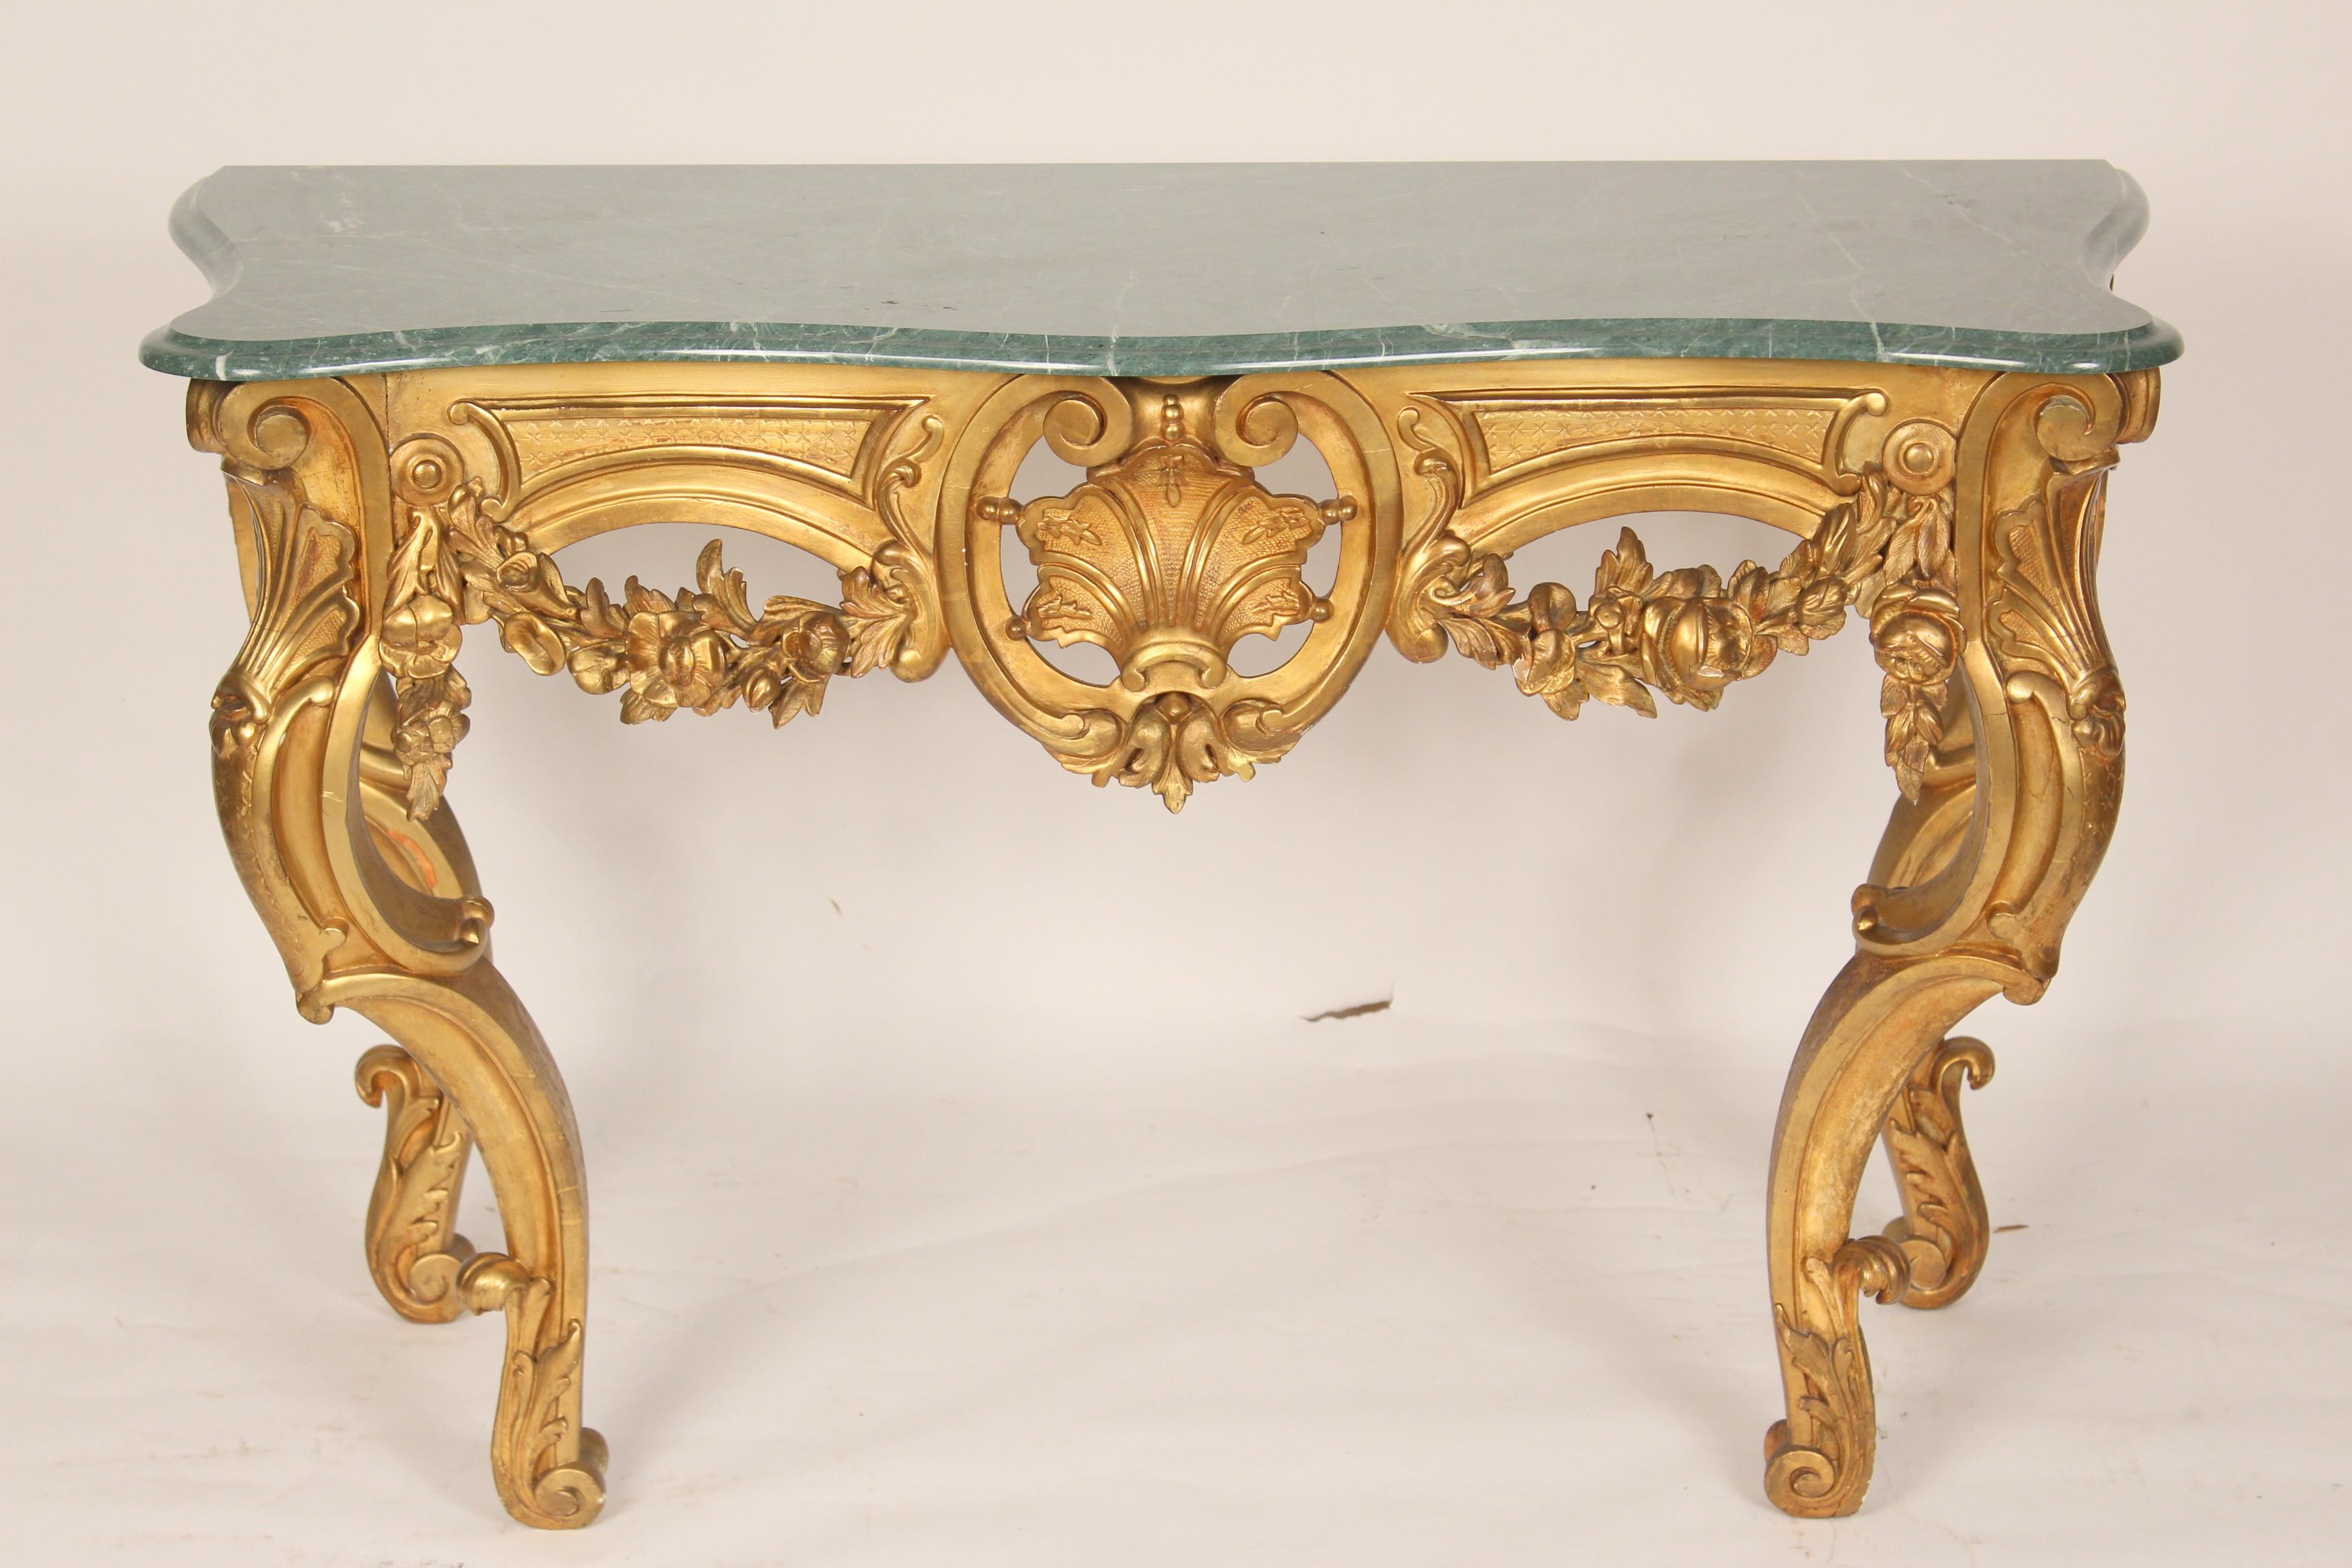 Antique Louis XV style gilt wood console table with a marble top, late 19th century. The marble top is late 20th century.